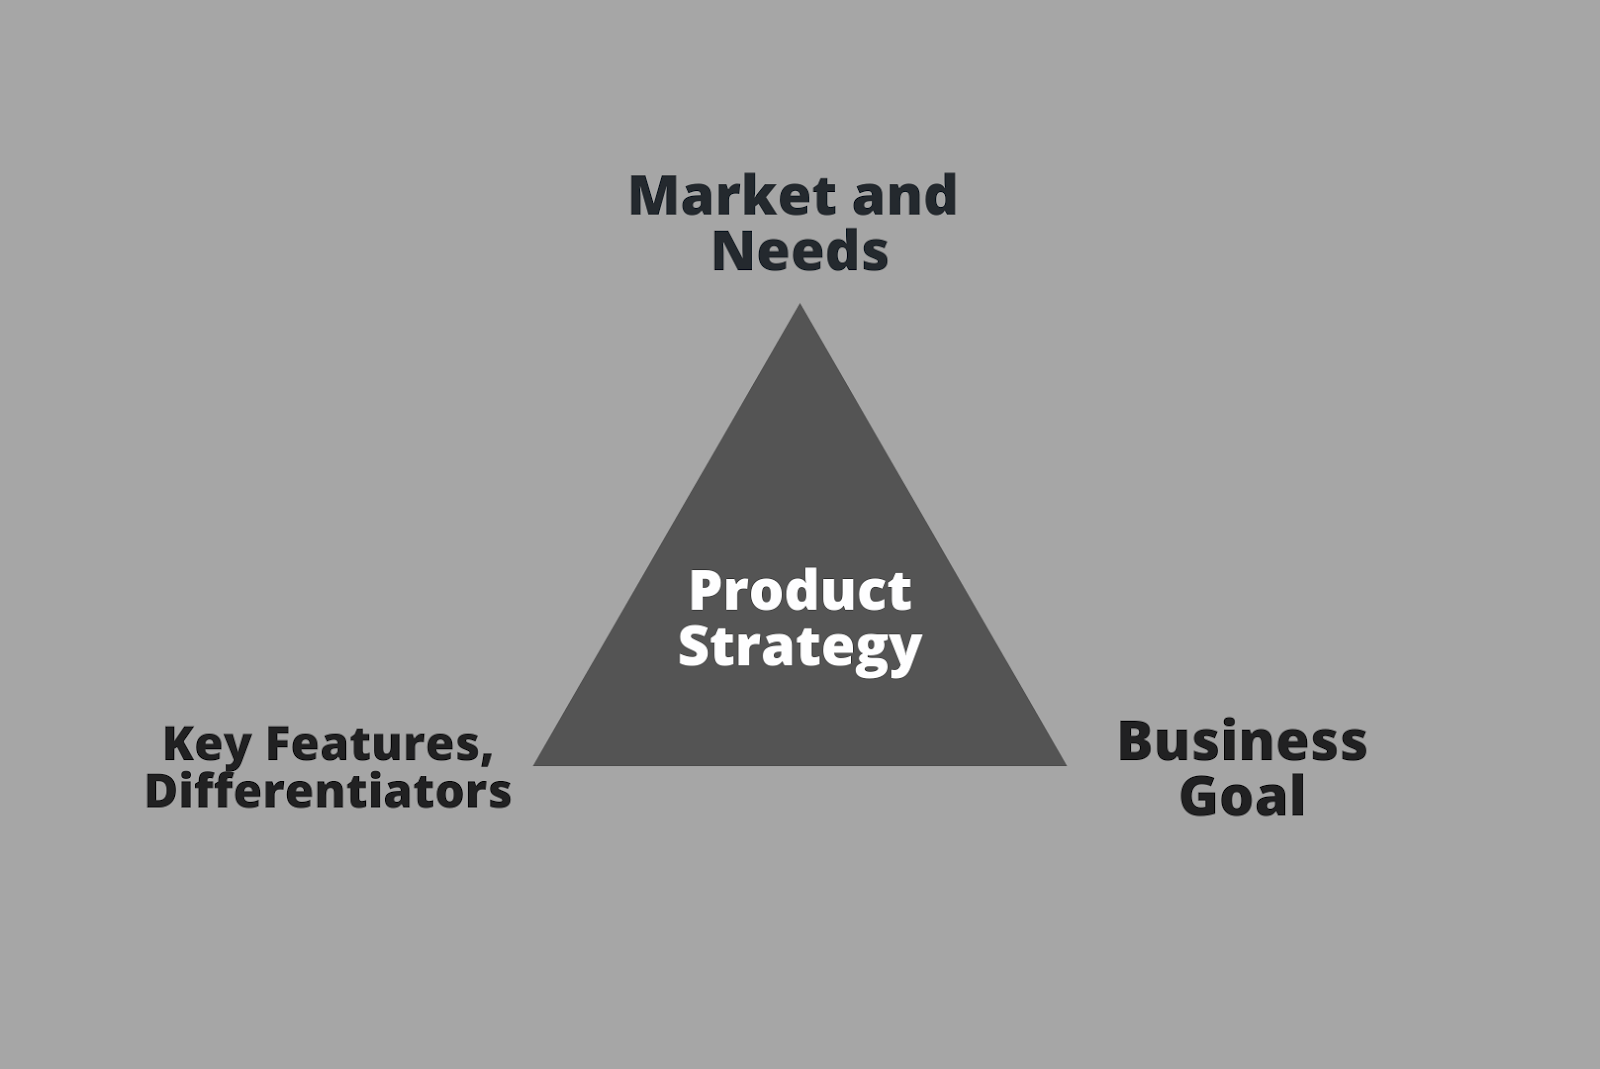 product strategy